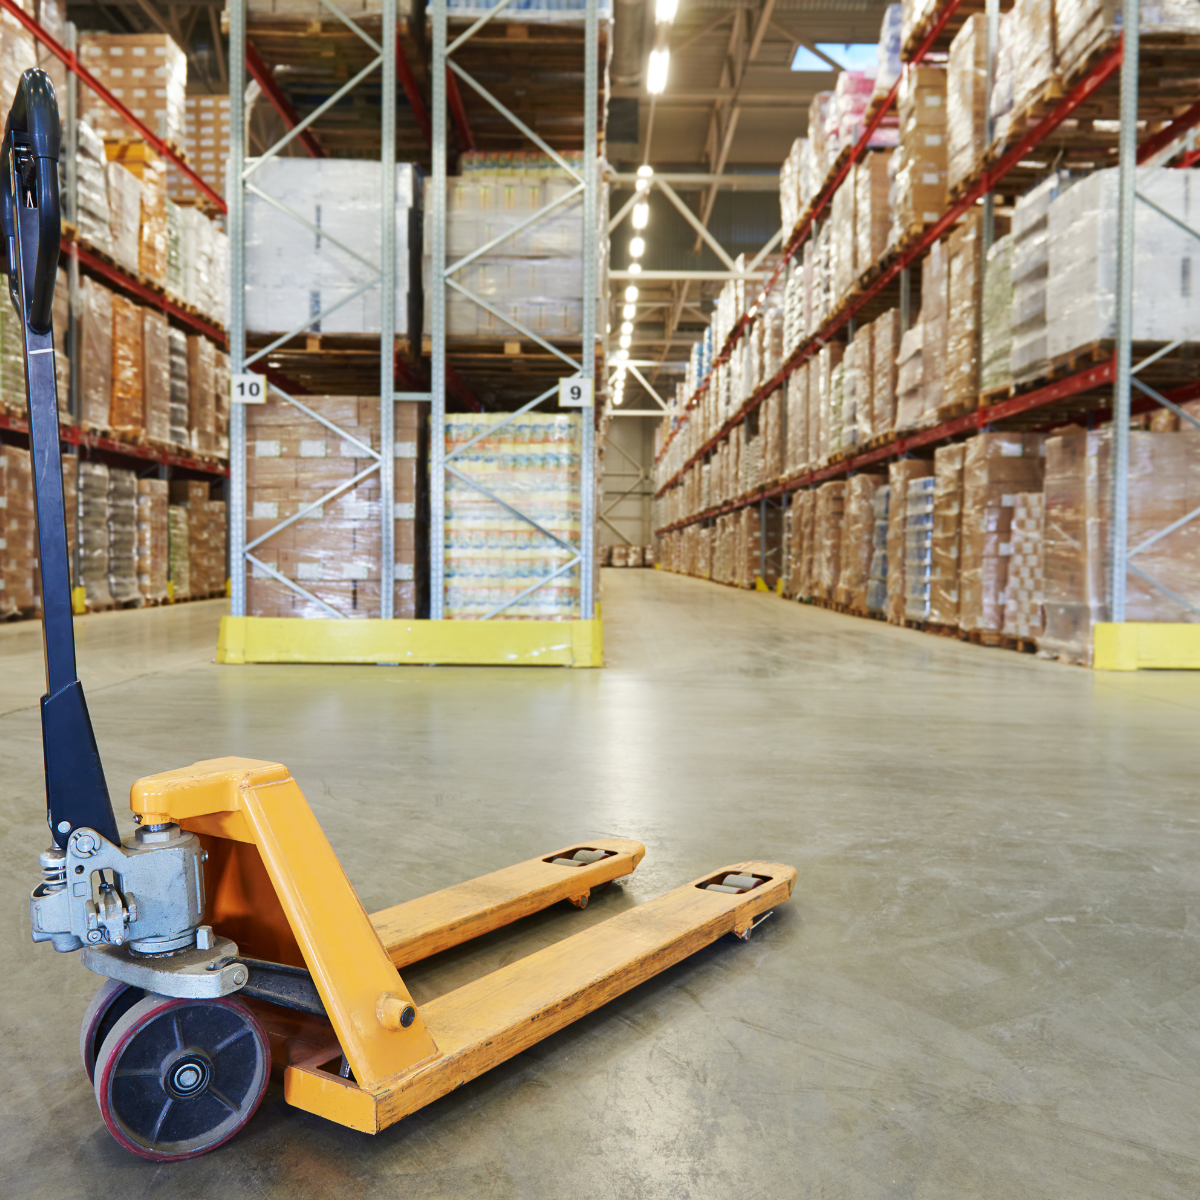 5 Reasons People Outsource Warehousing and Logistics